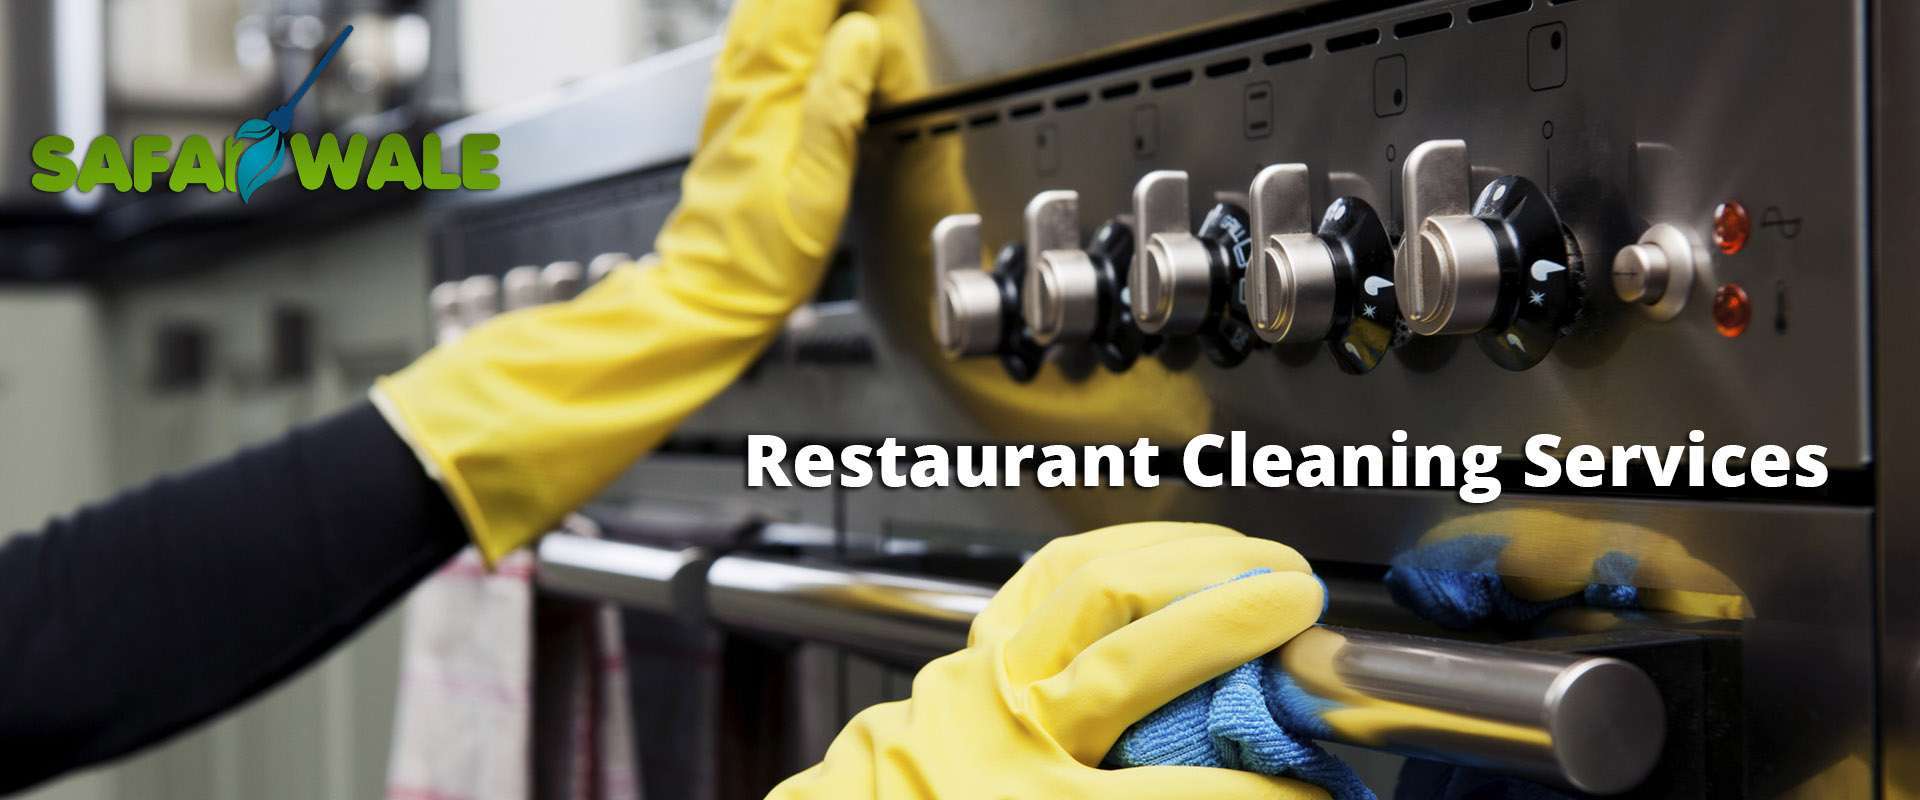 restaurant cleaning services in Pune